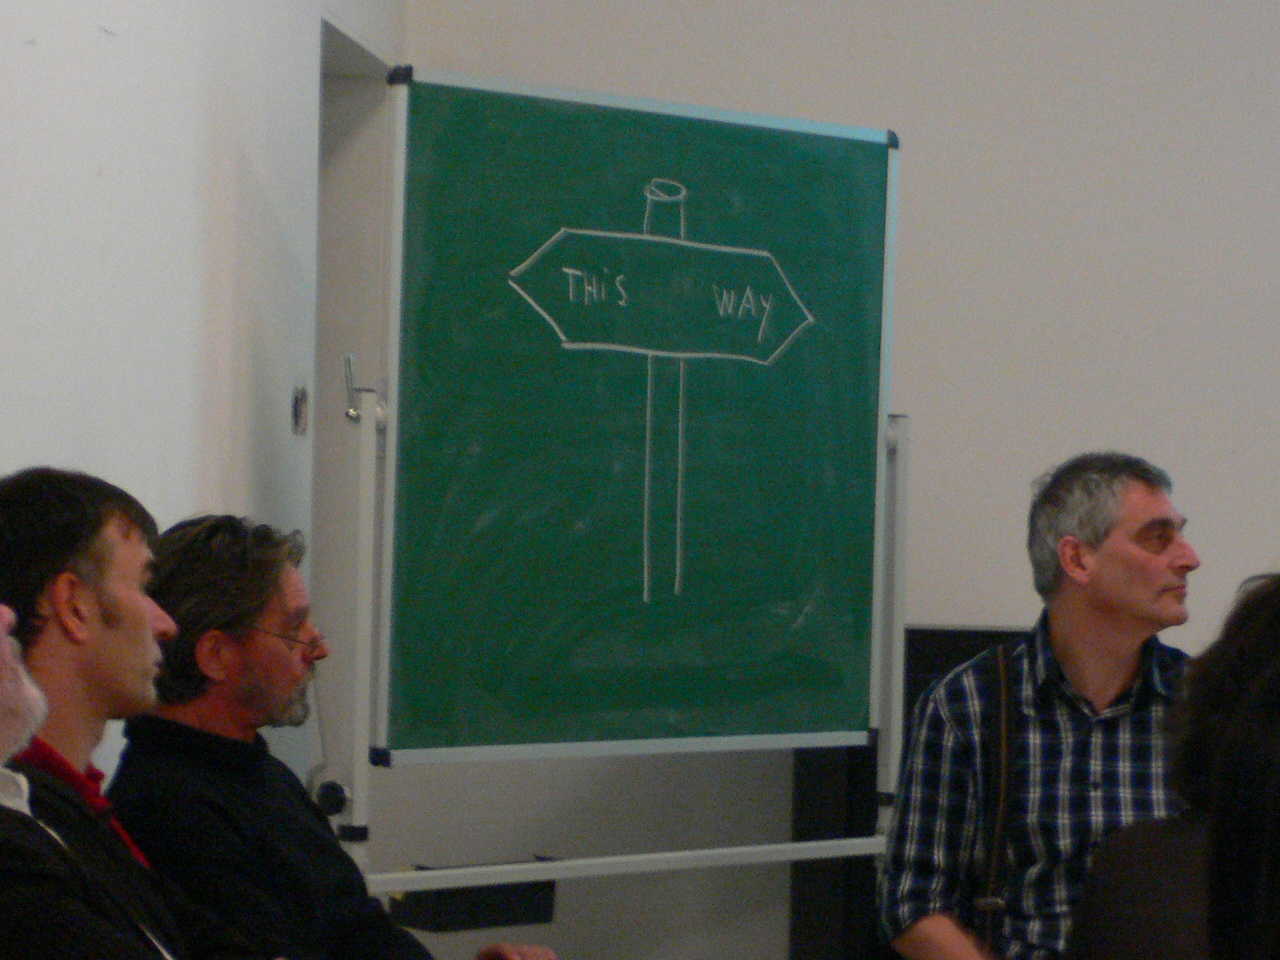 22 november 2007, lecture presentation Yota Ioannidou with Florian Göttke (left),Ulay (middle) and John Heymans (right). Image credit: Machteld Aardse (DAI, 2007).